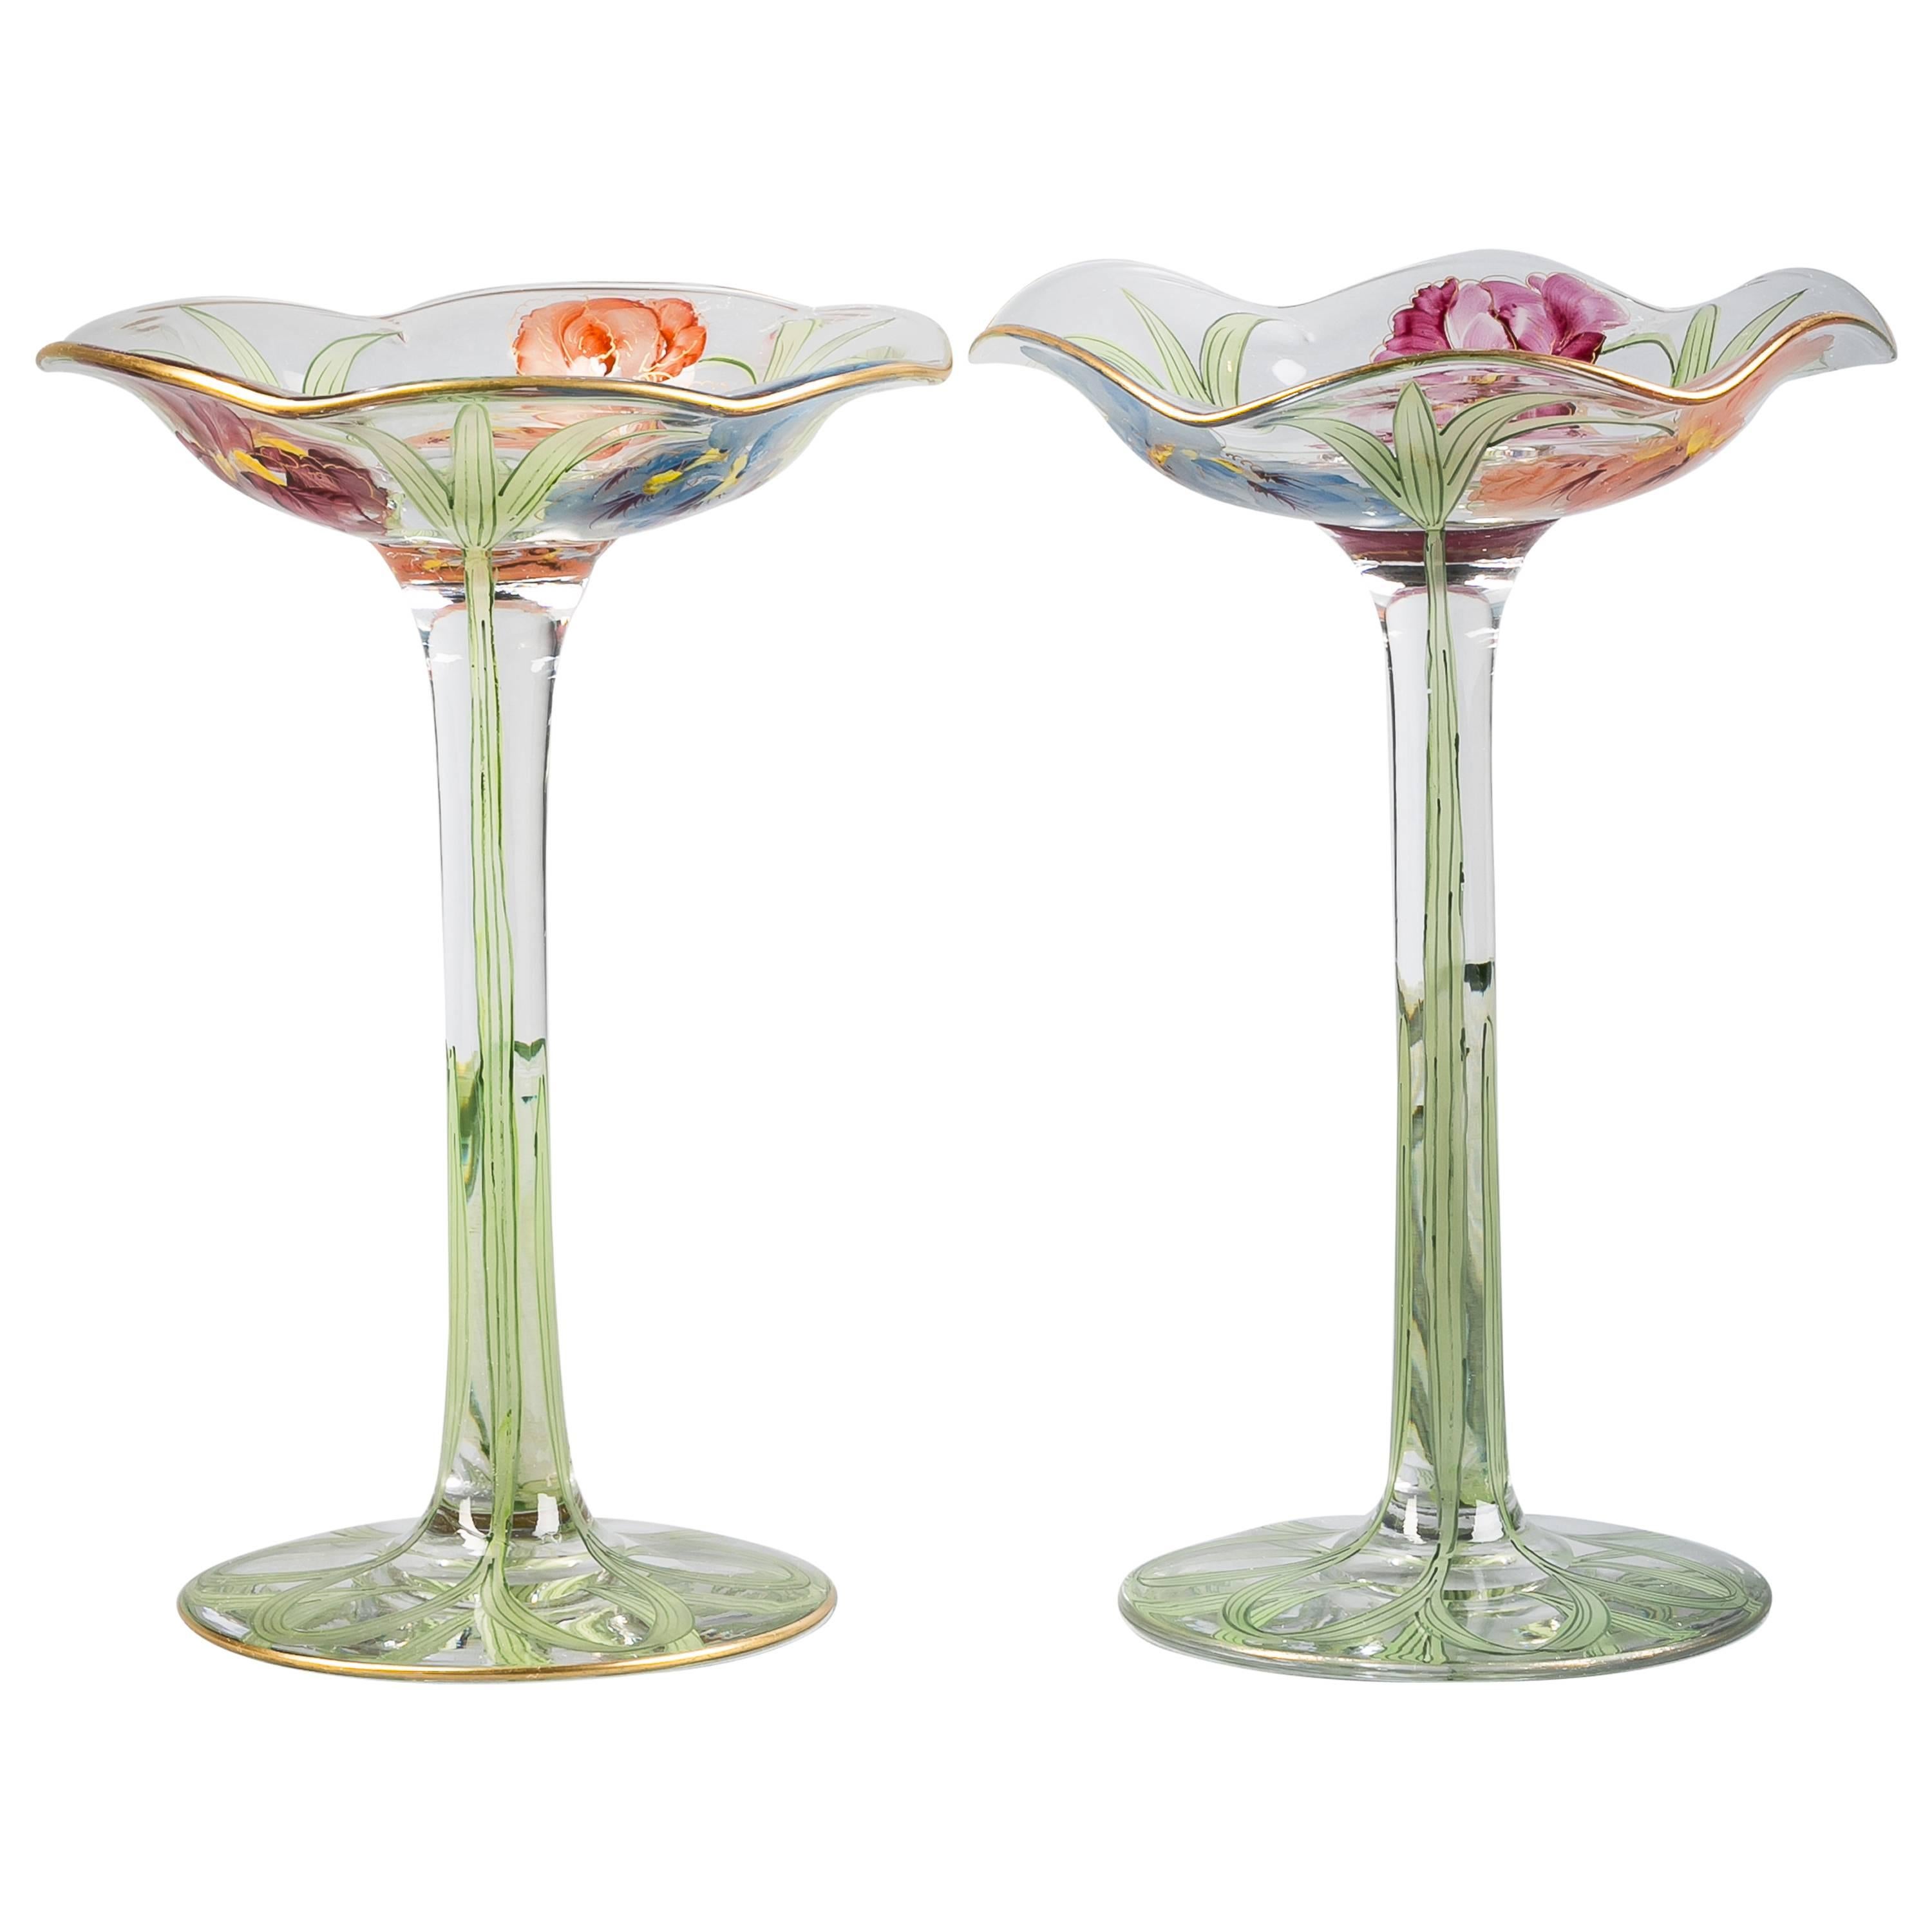 Pair of American Enameled Glass Footed Compotes, circa 1880